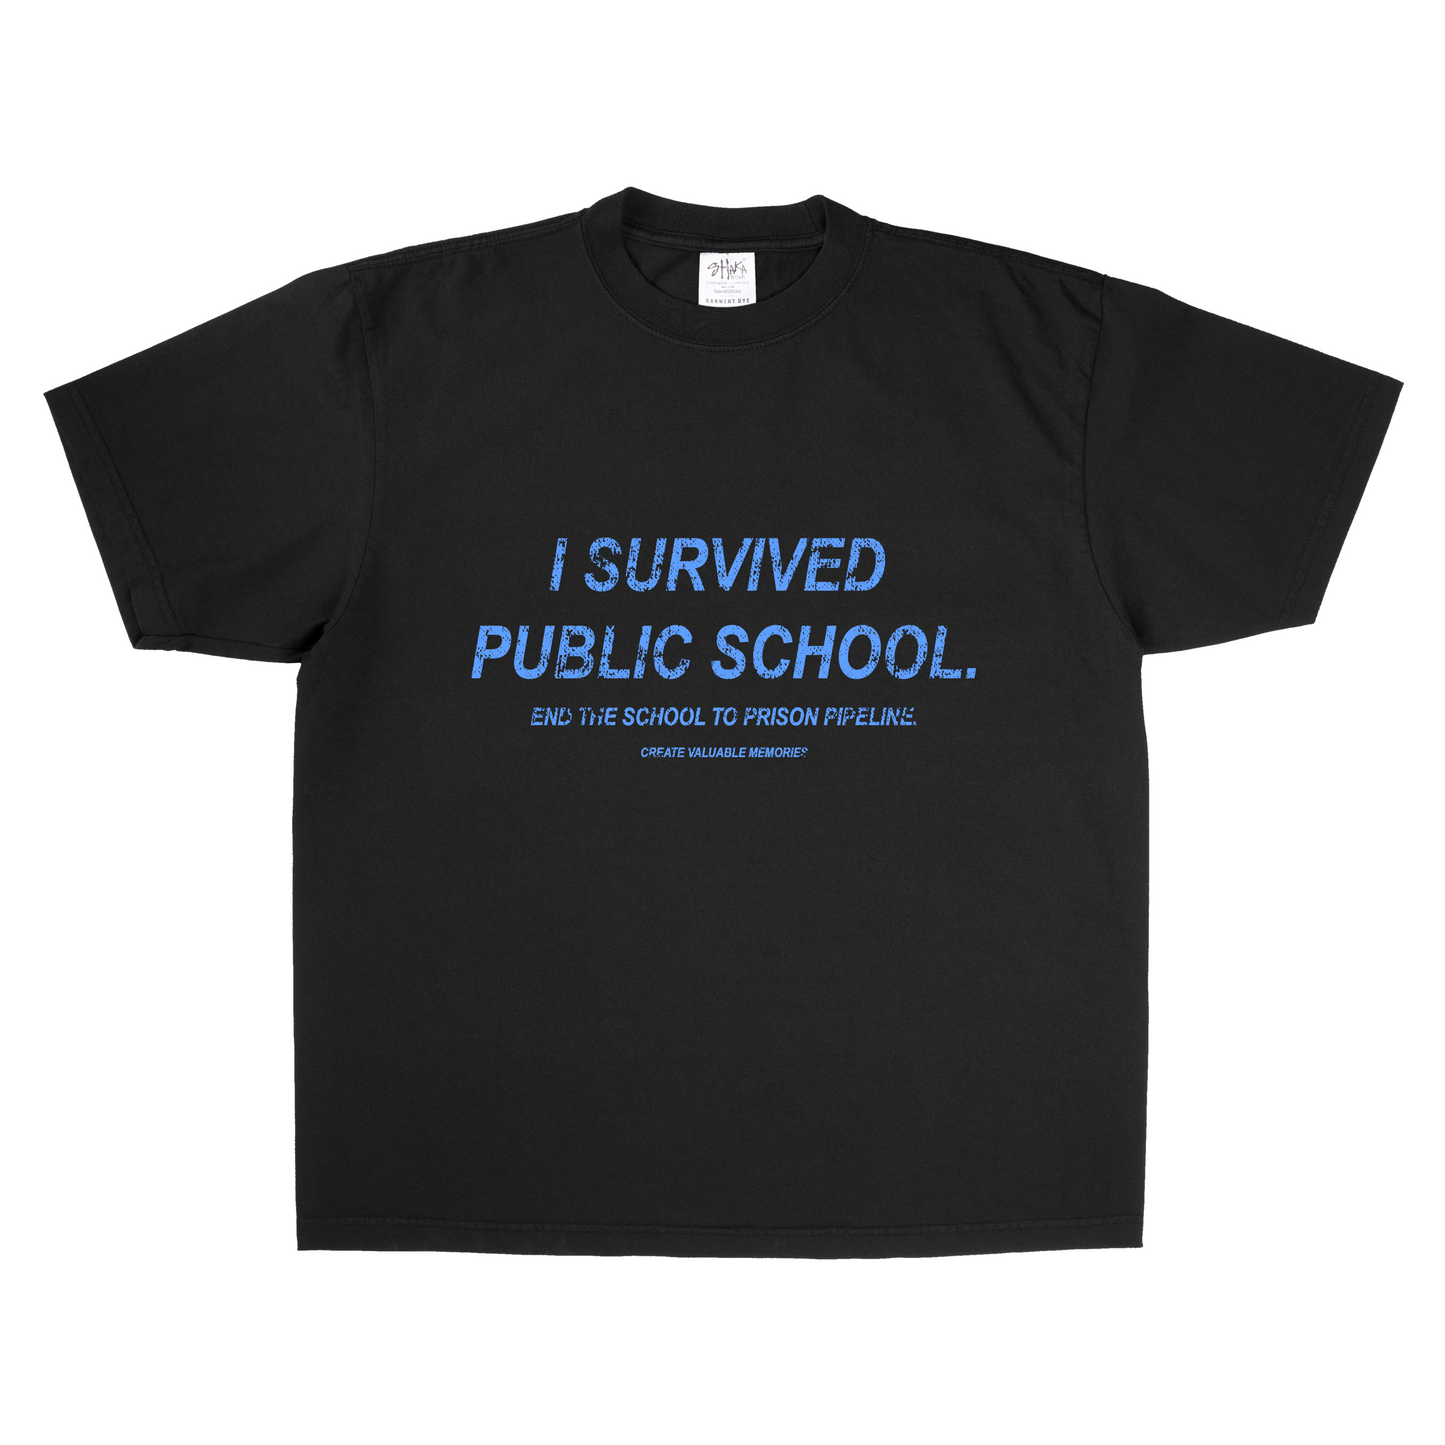 "I survived Public School" (End the School to Prison Pipeline) tee